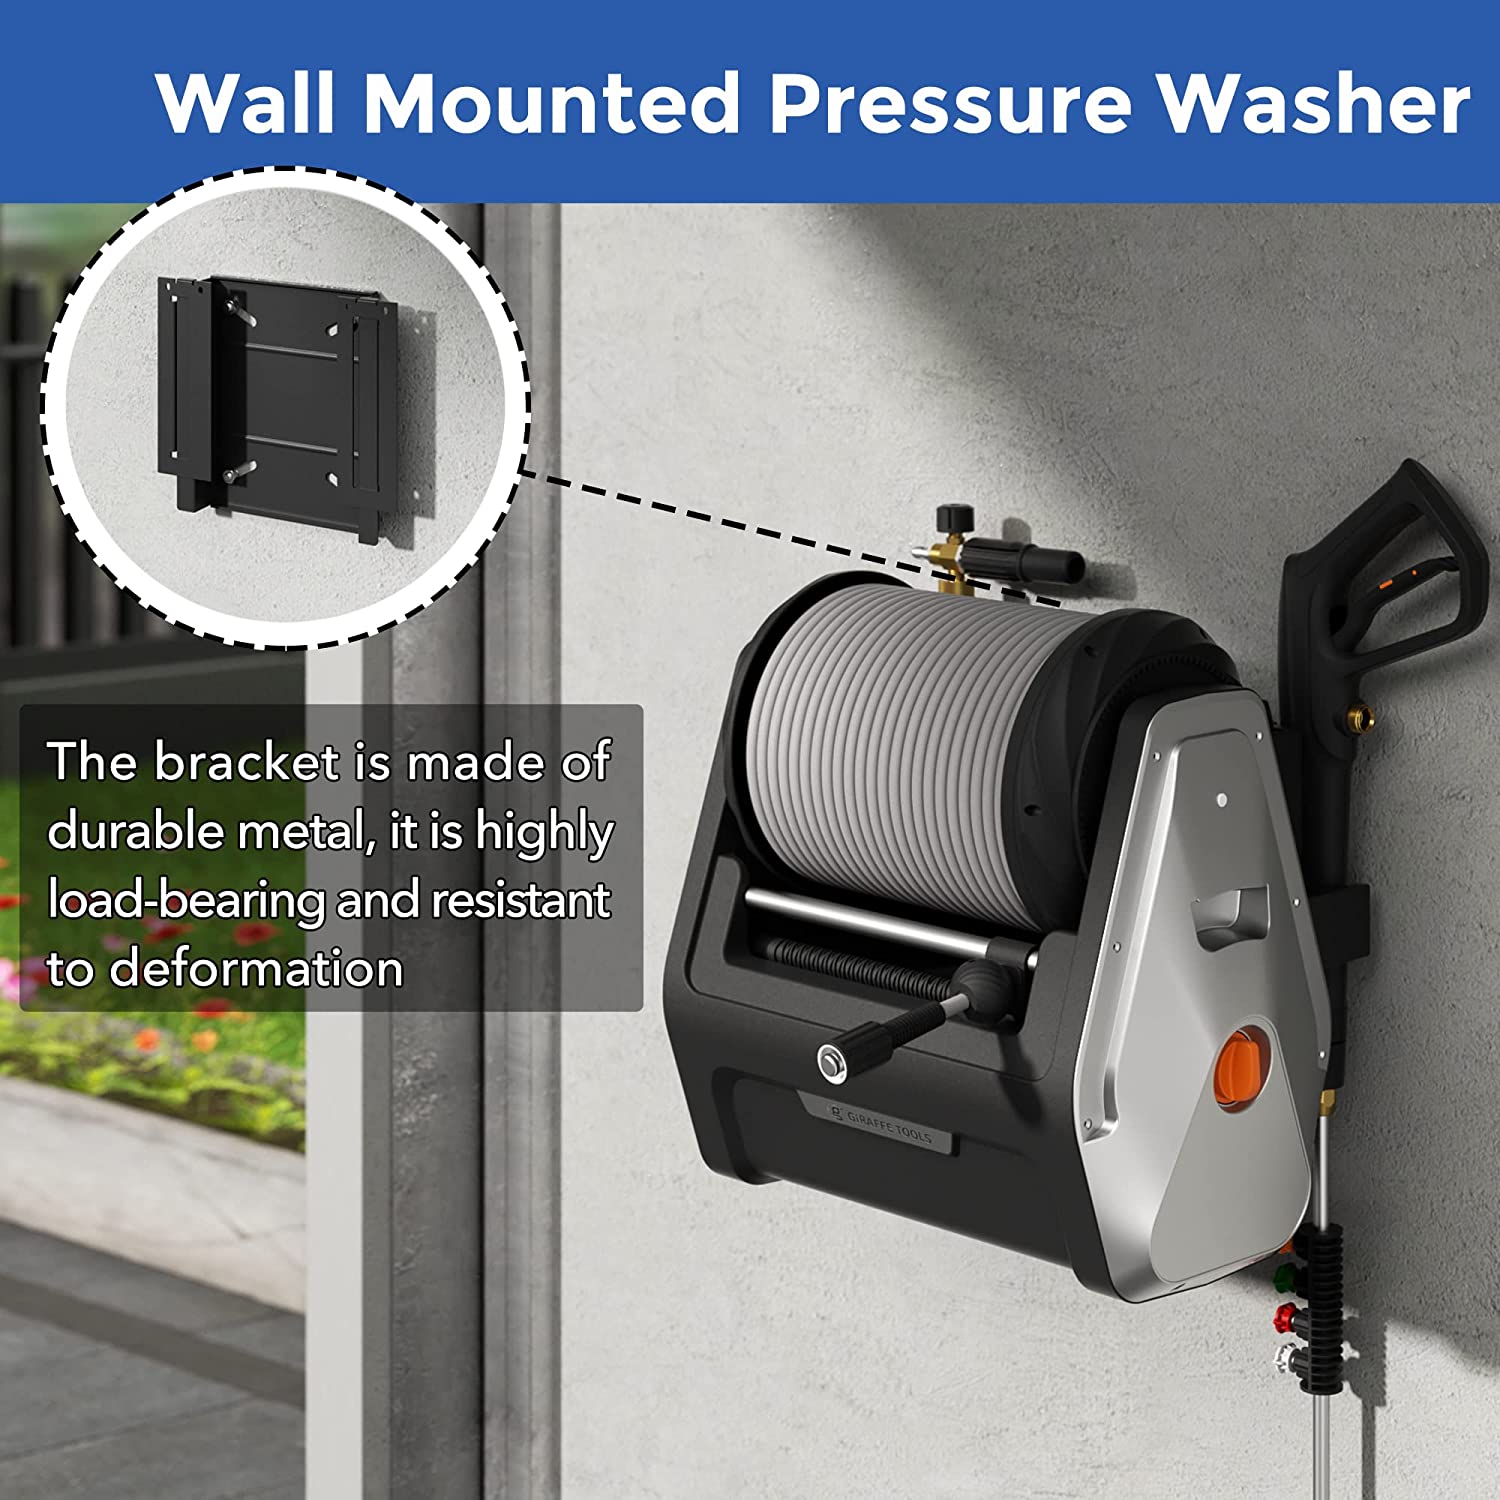 Giraffe Tools Grandfalls Pressure Washer Plus Soft, Electric Pressure Washer Wall Mount, 100ft Retractable Pressure Washer Reel, 4 Quick Connect Nozzles, Foam Cannon, Cleaning Patios, Cars, Driveways - image 5 of 7